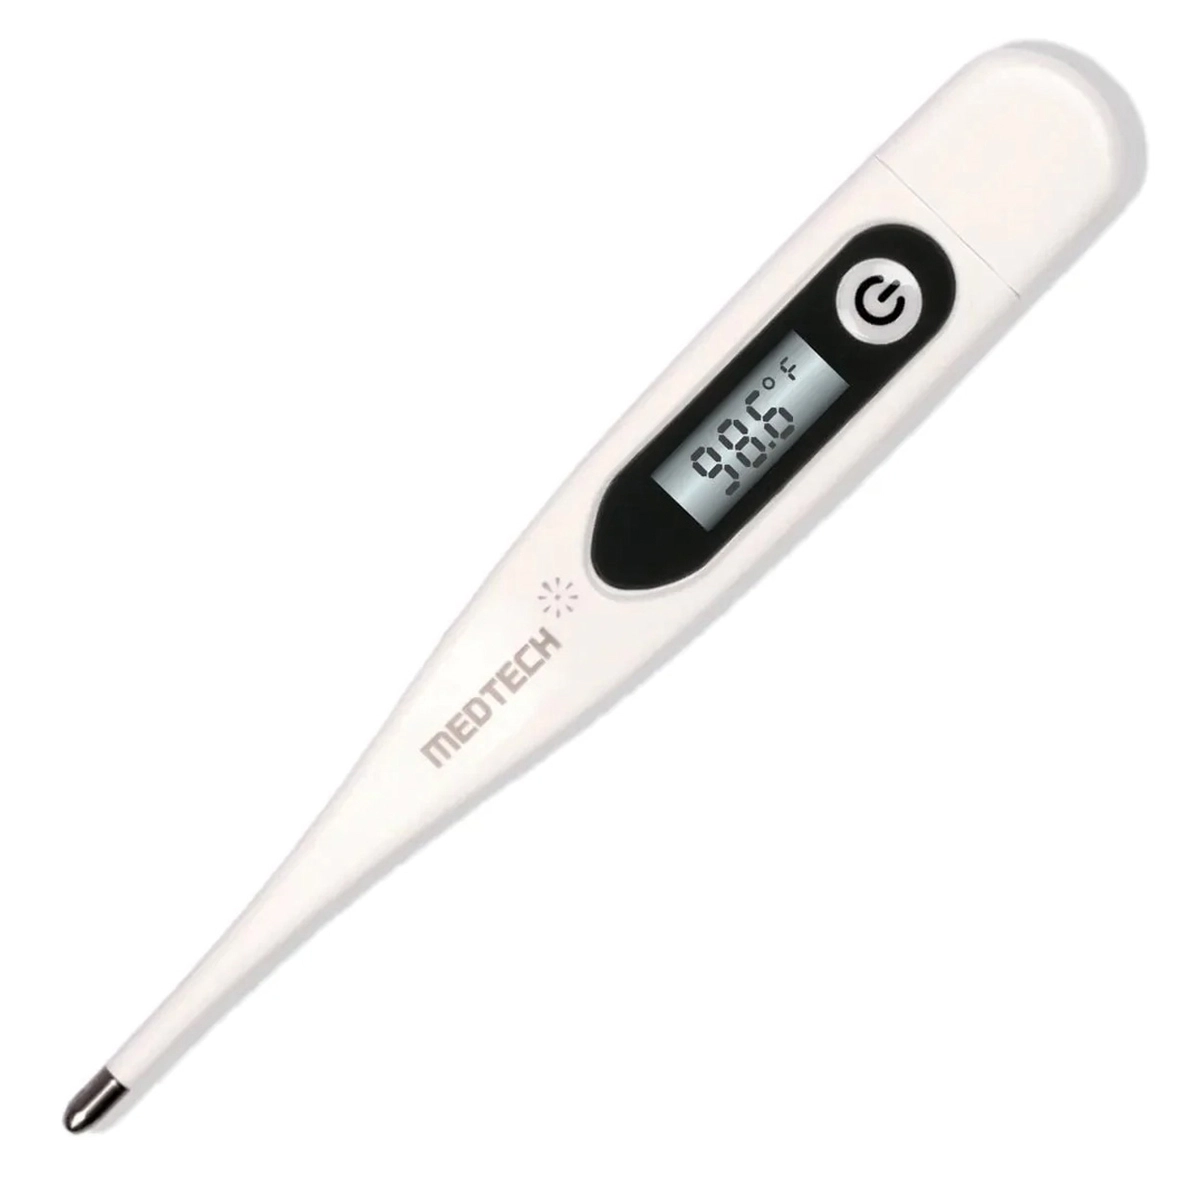 Hicks DMT 102 Digital Thermometer with Memory & Beeper - Auto Shut Off -  White Thermometer